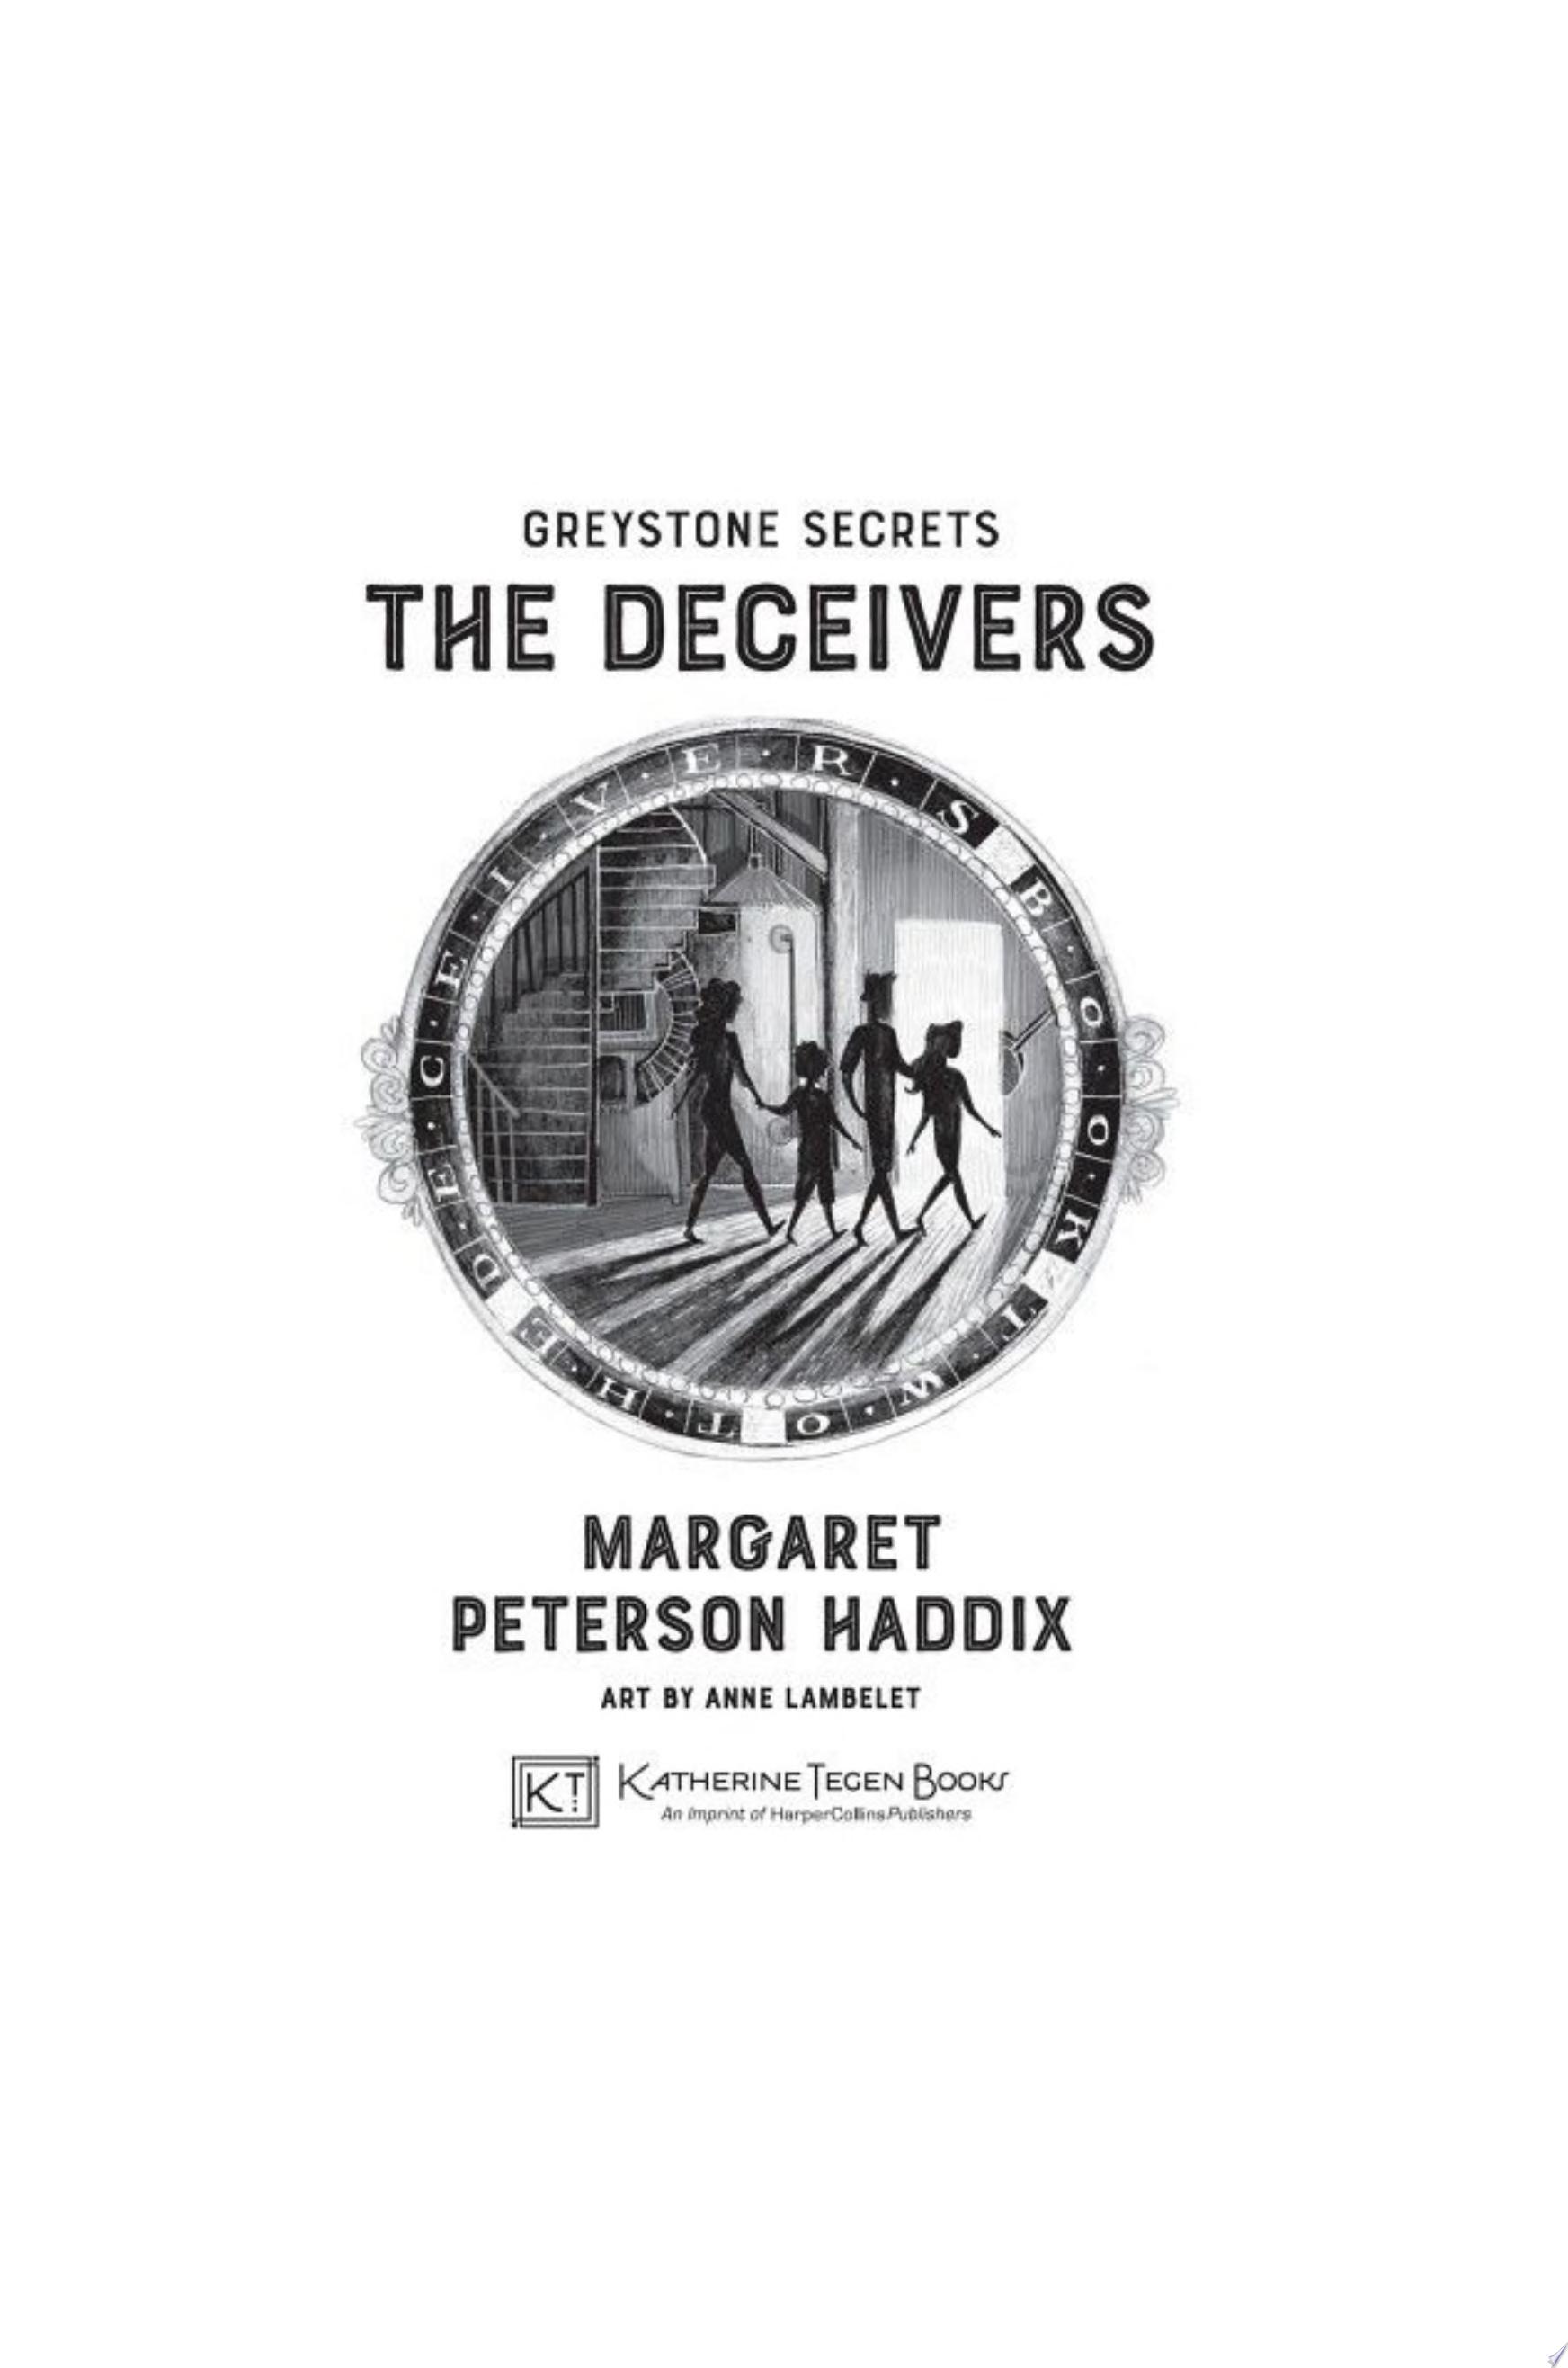 Image for "Greystone Secrets #2: The Deceivers"